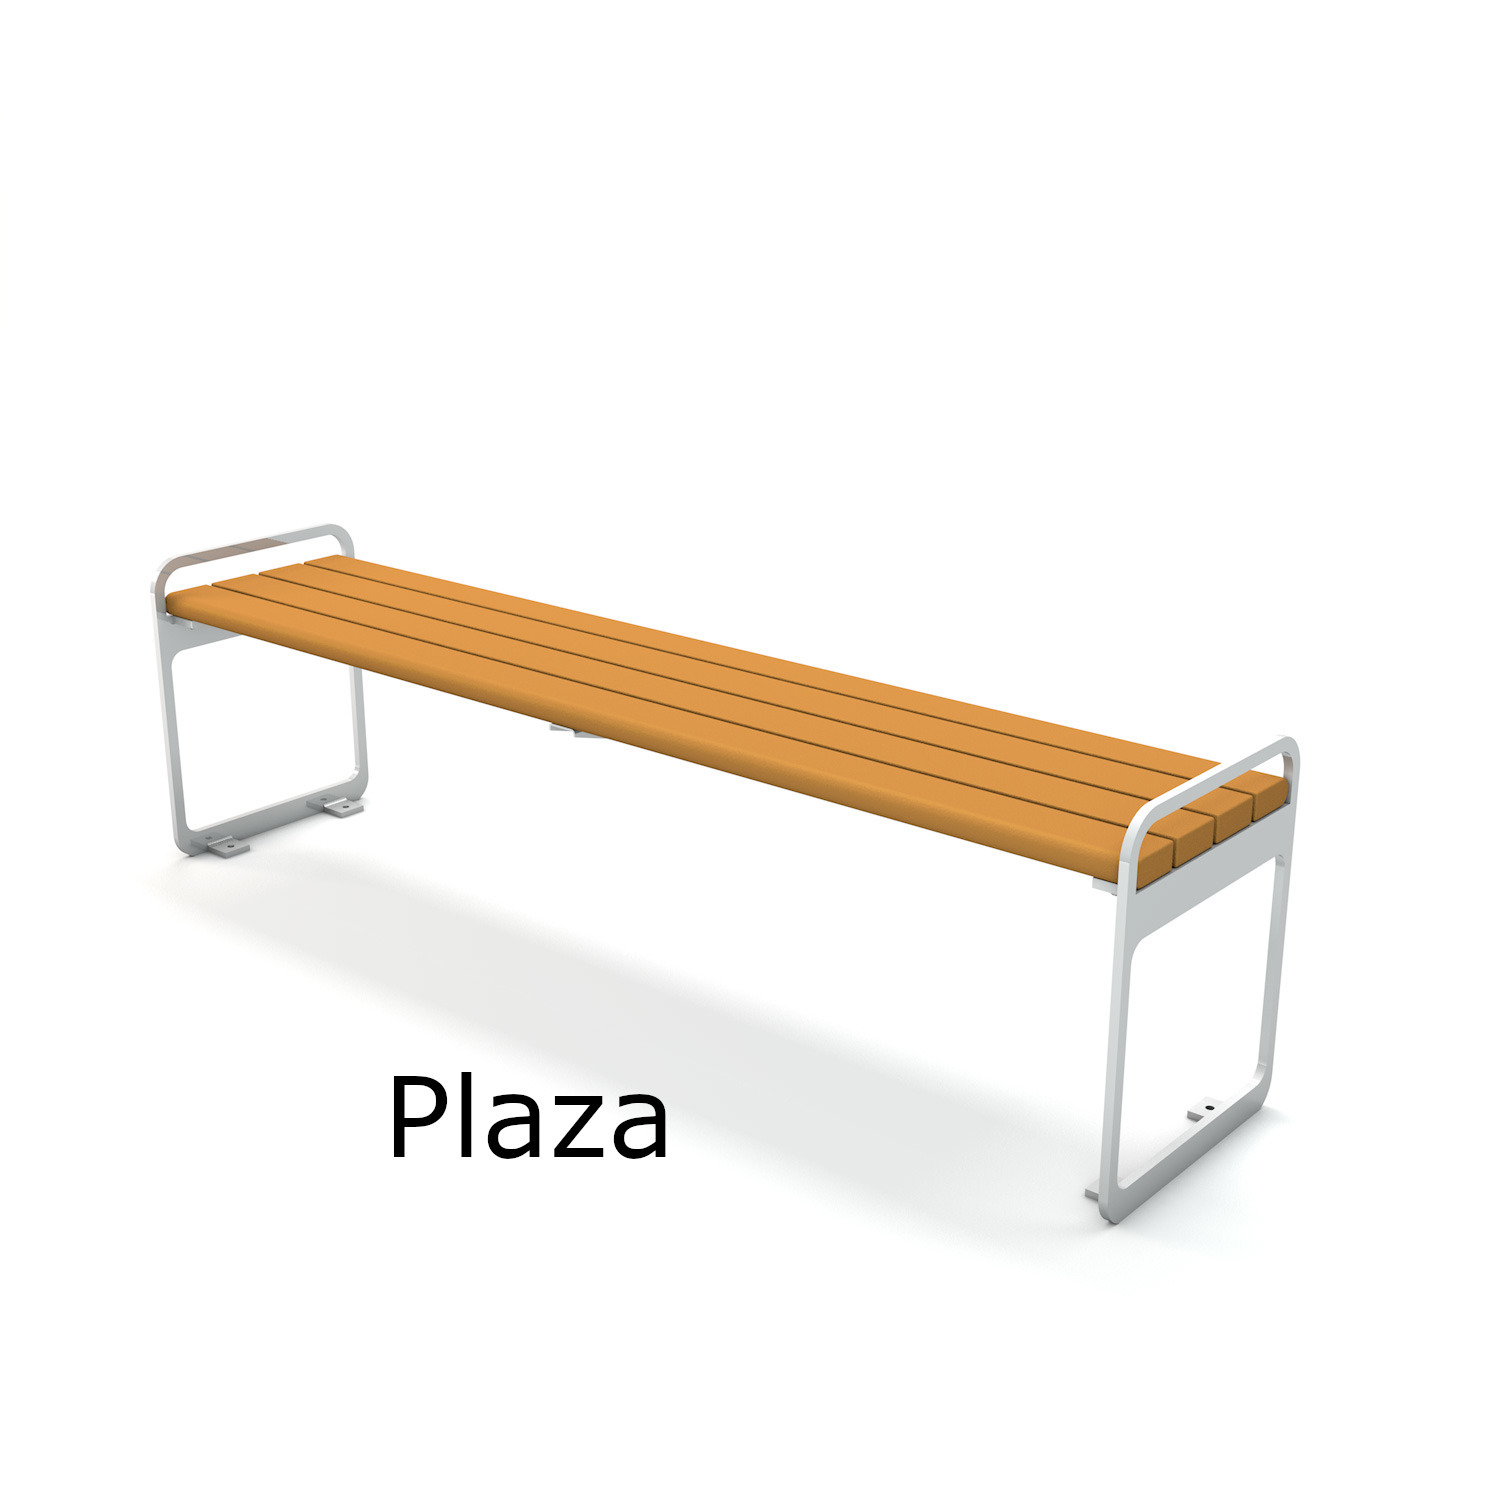 Plaza Recycled Plastic Lumber Flat Bench